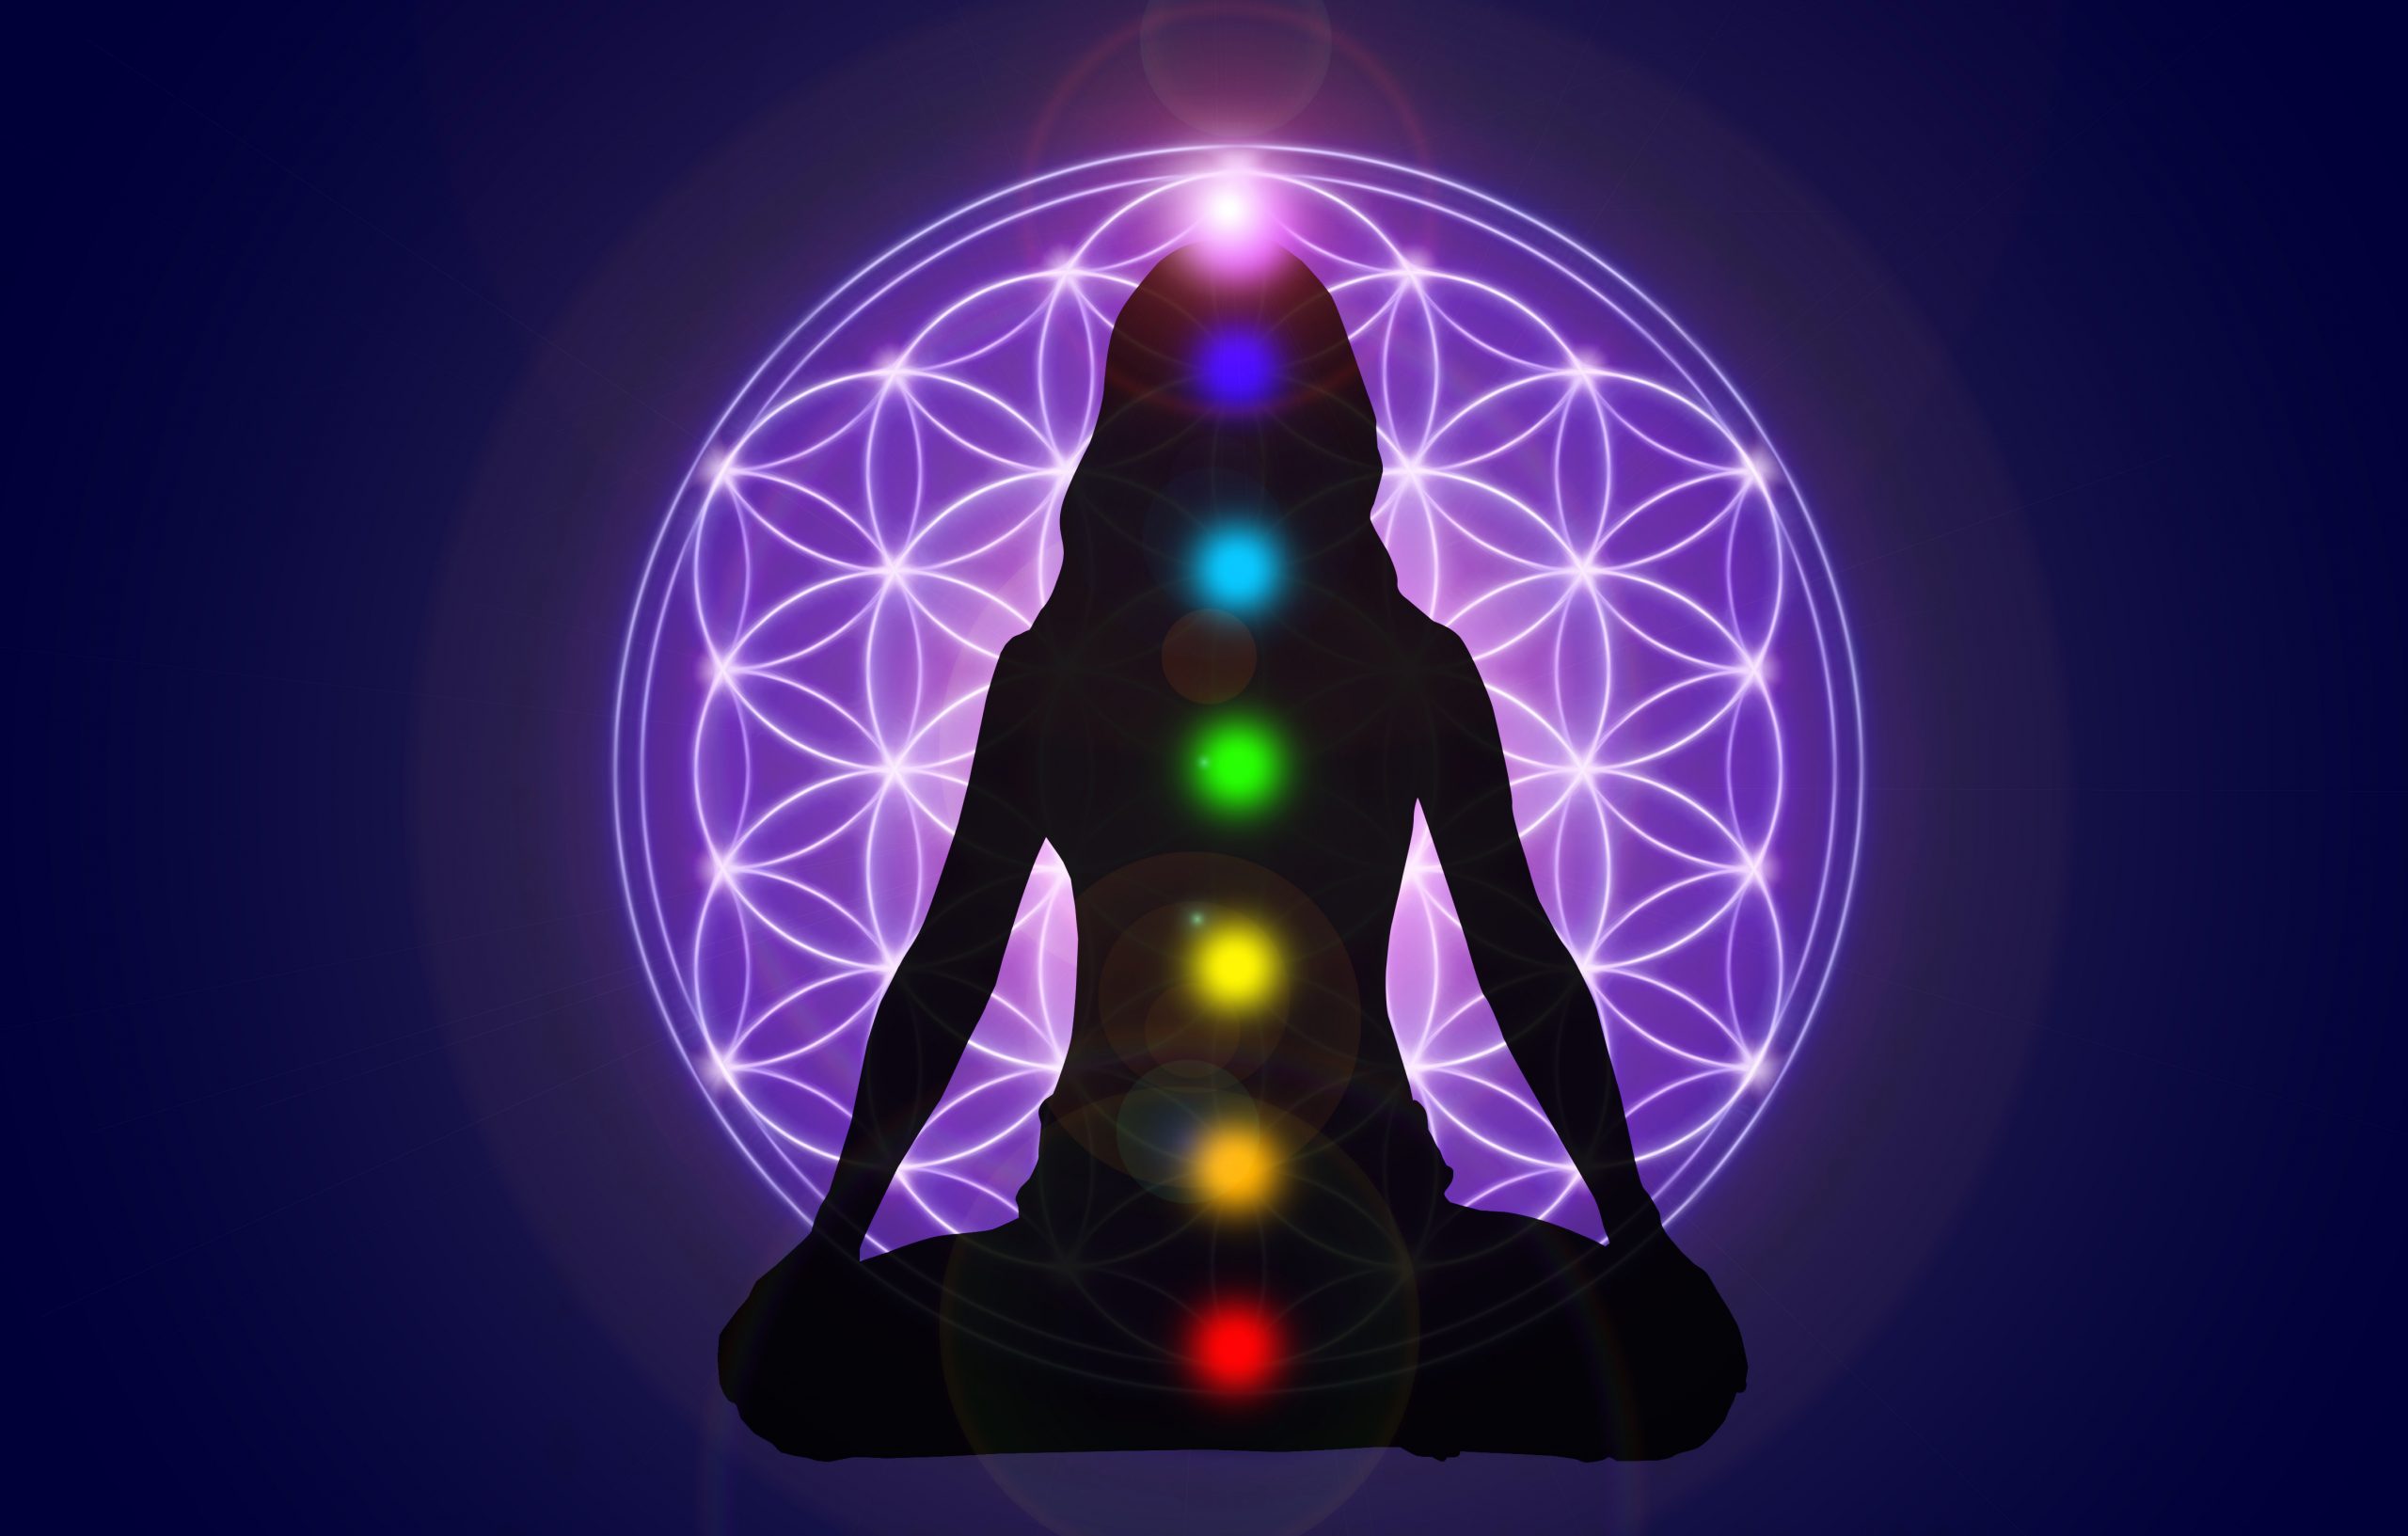 What is chakra